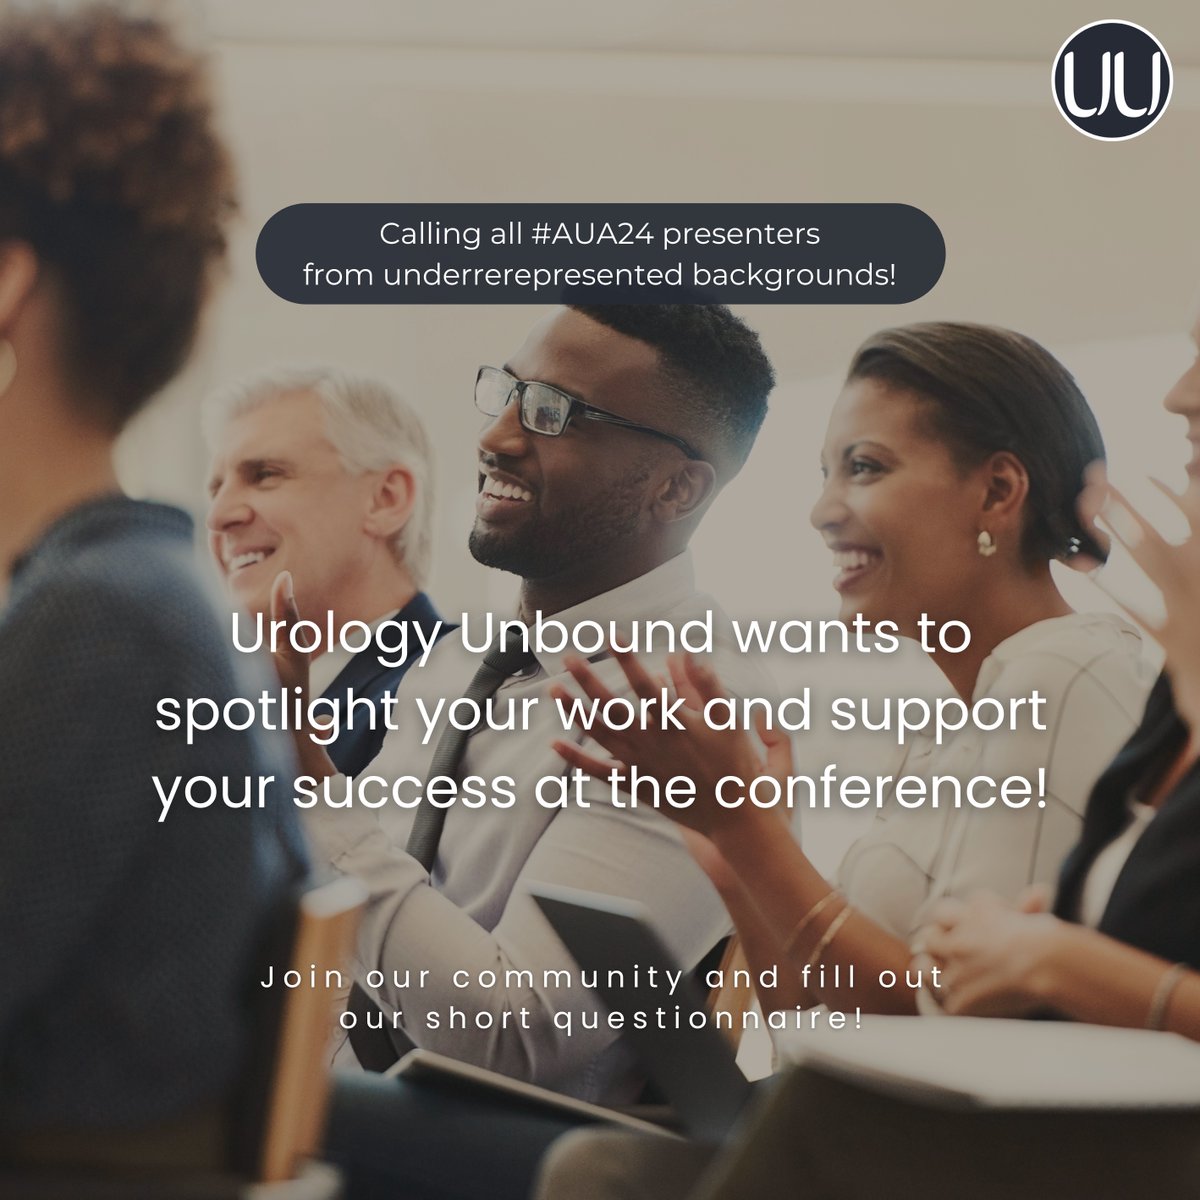 Calling all underrepresented minorities presenting at #AUA24! We'll be announcing all presentations from our community to our entire members, boosting your visibility at the conference! Get listed: Join us & fill out survey through link in bio. @AmerUrological @rfrankjones_uro